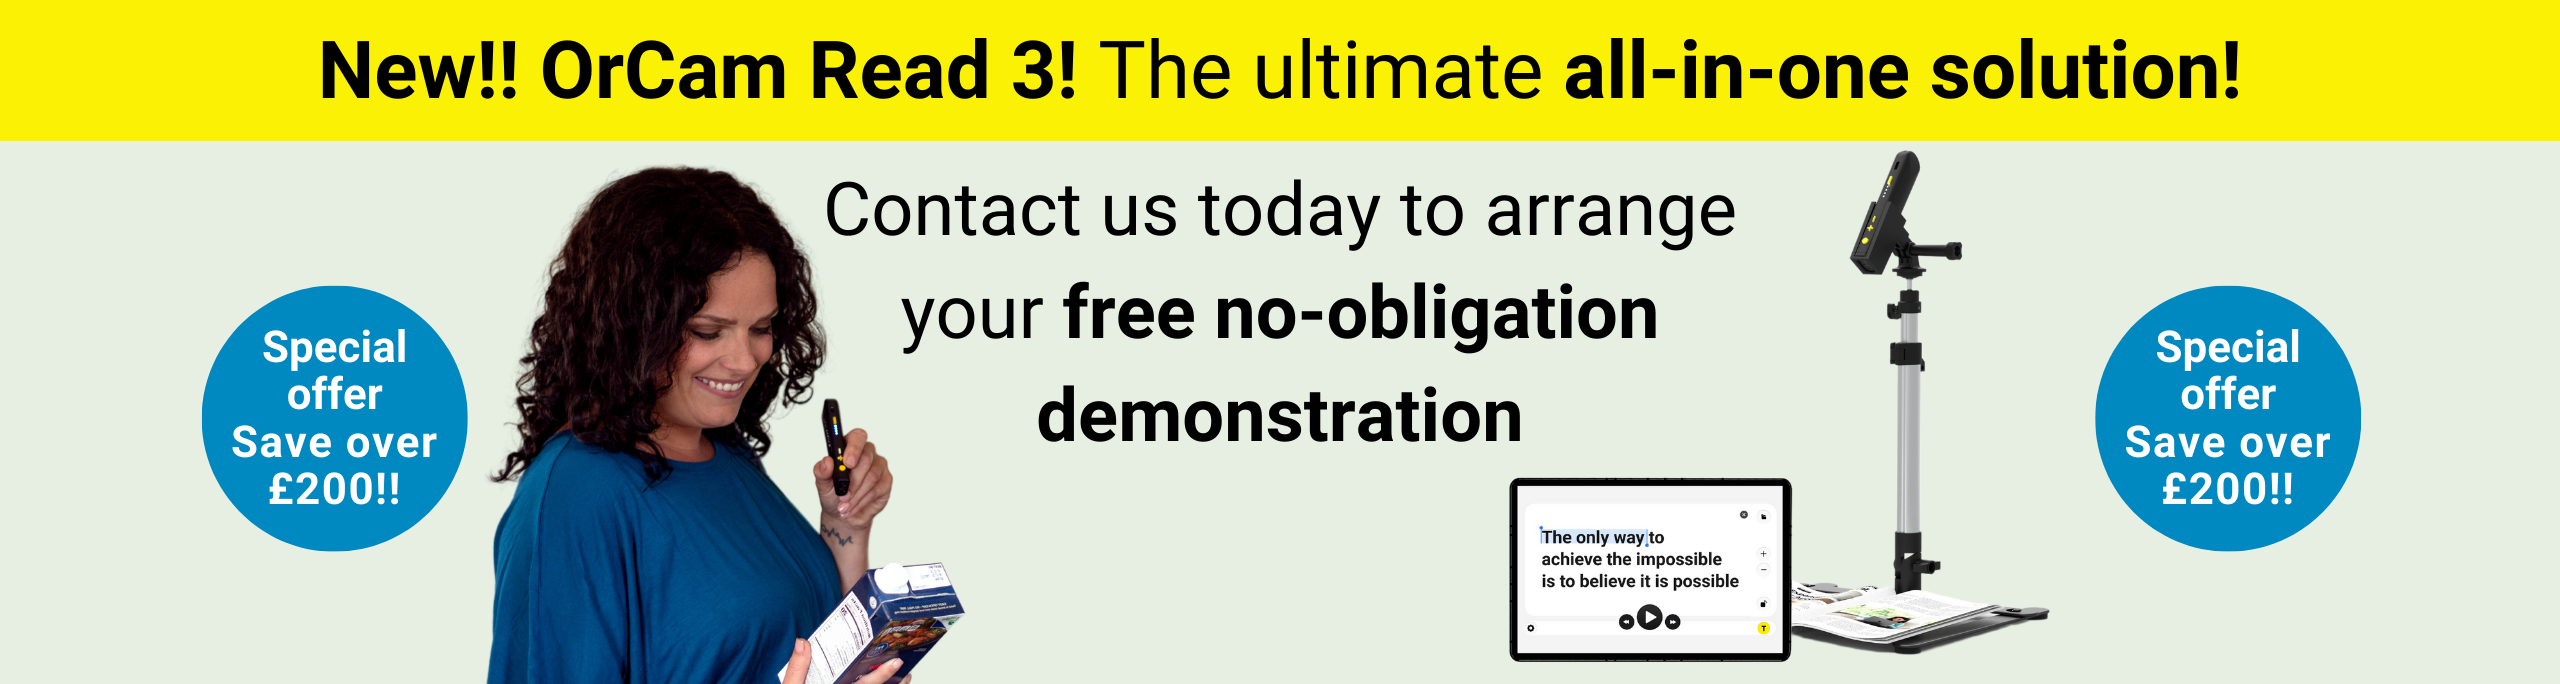 New!! OrCam Read 3! The ultimate all-in-one solution! Contact us today to arrange your free no-obligation demonstration